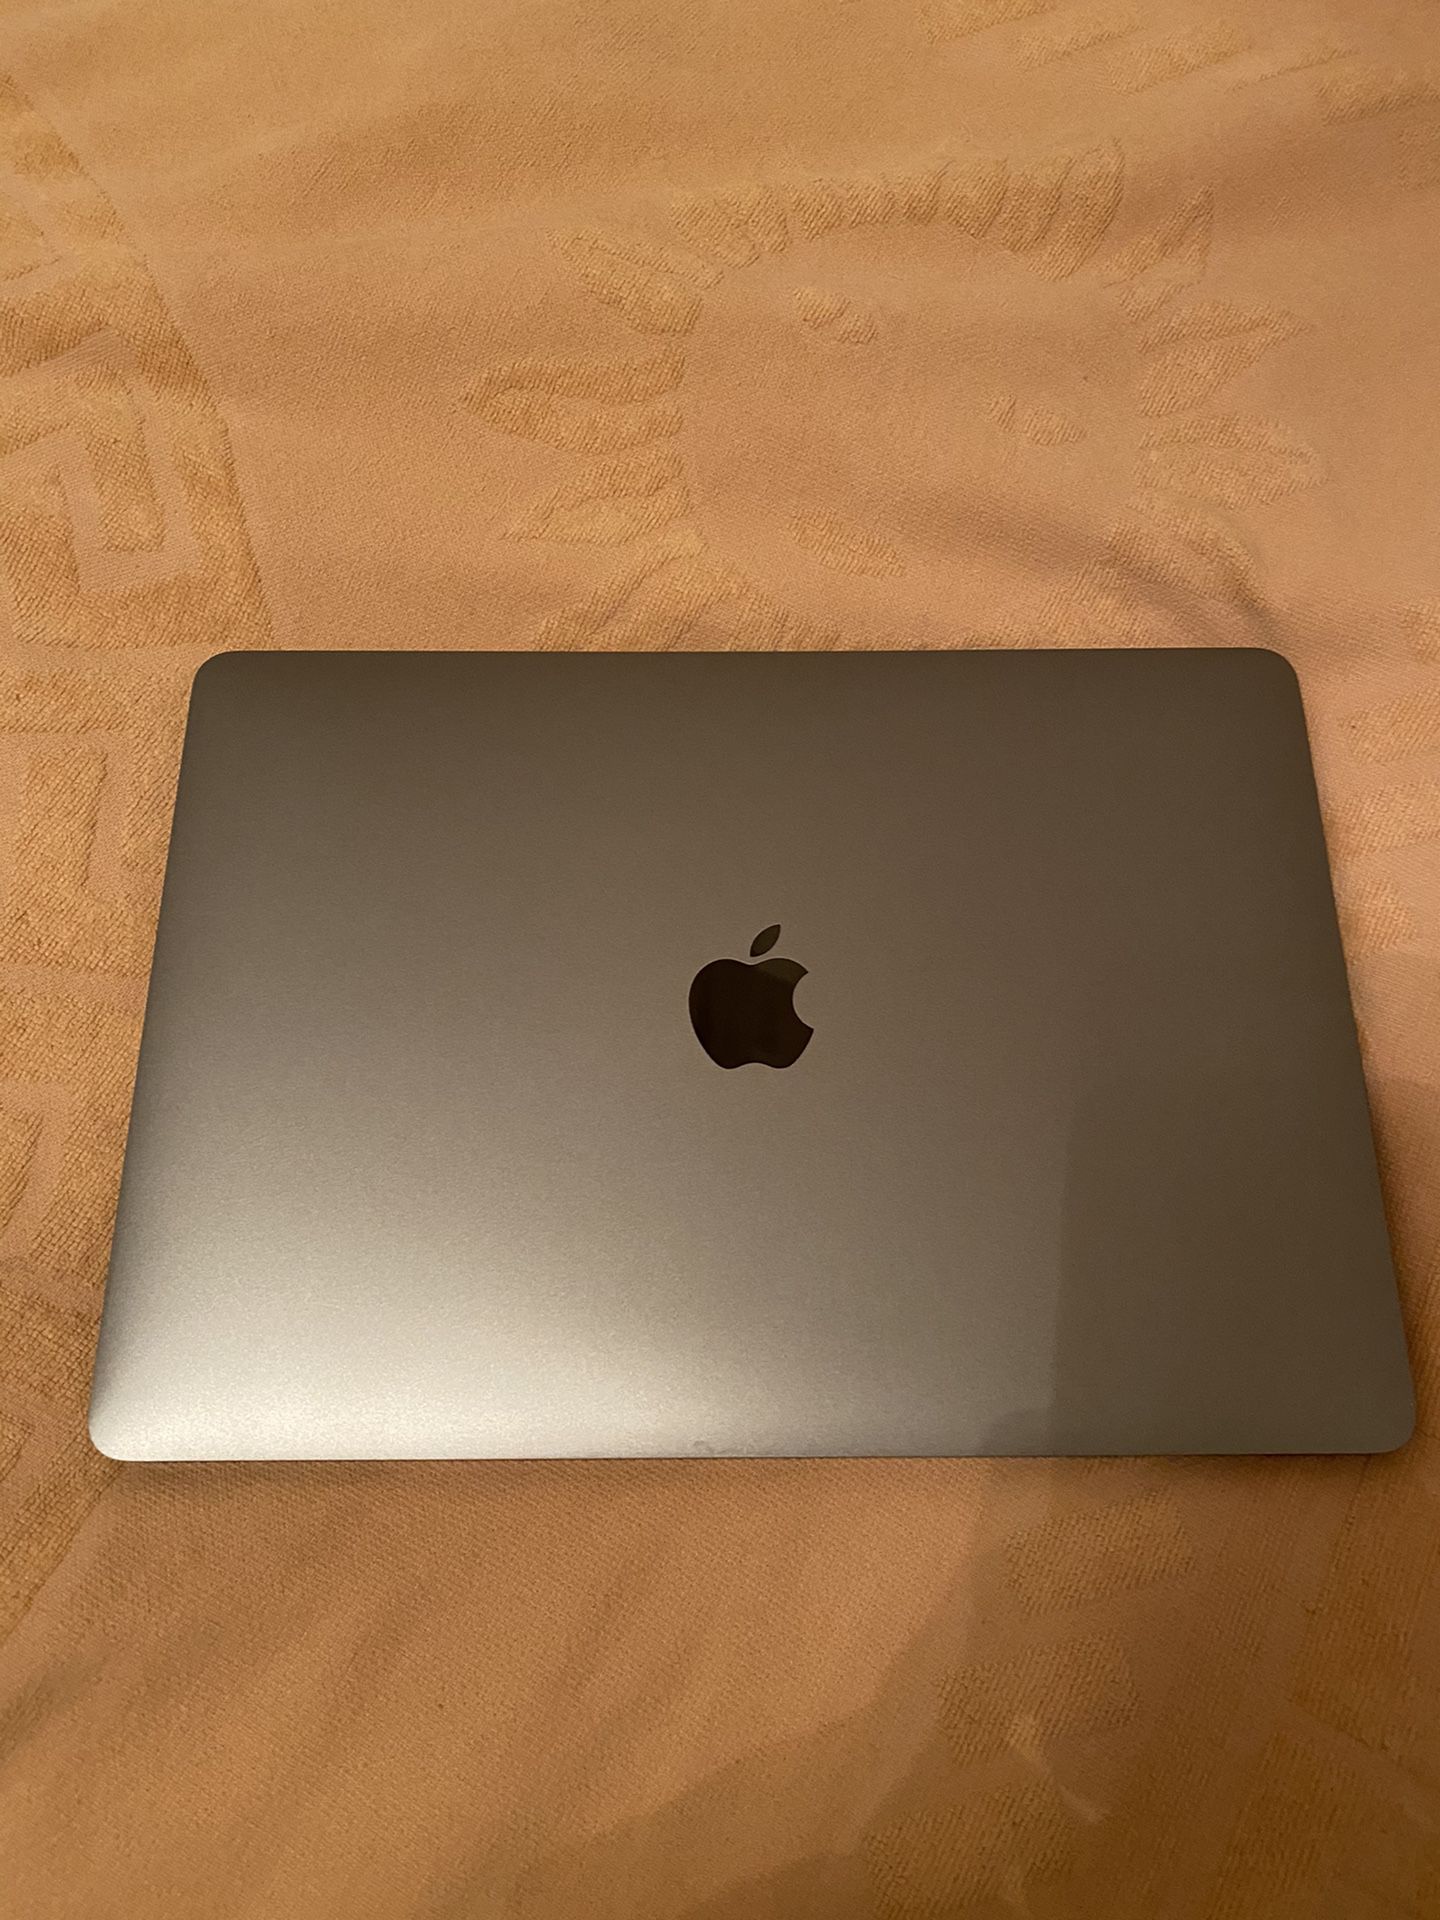 Macbook Pro 2017. Flawless condition